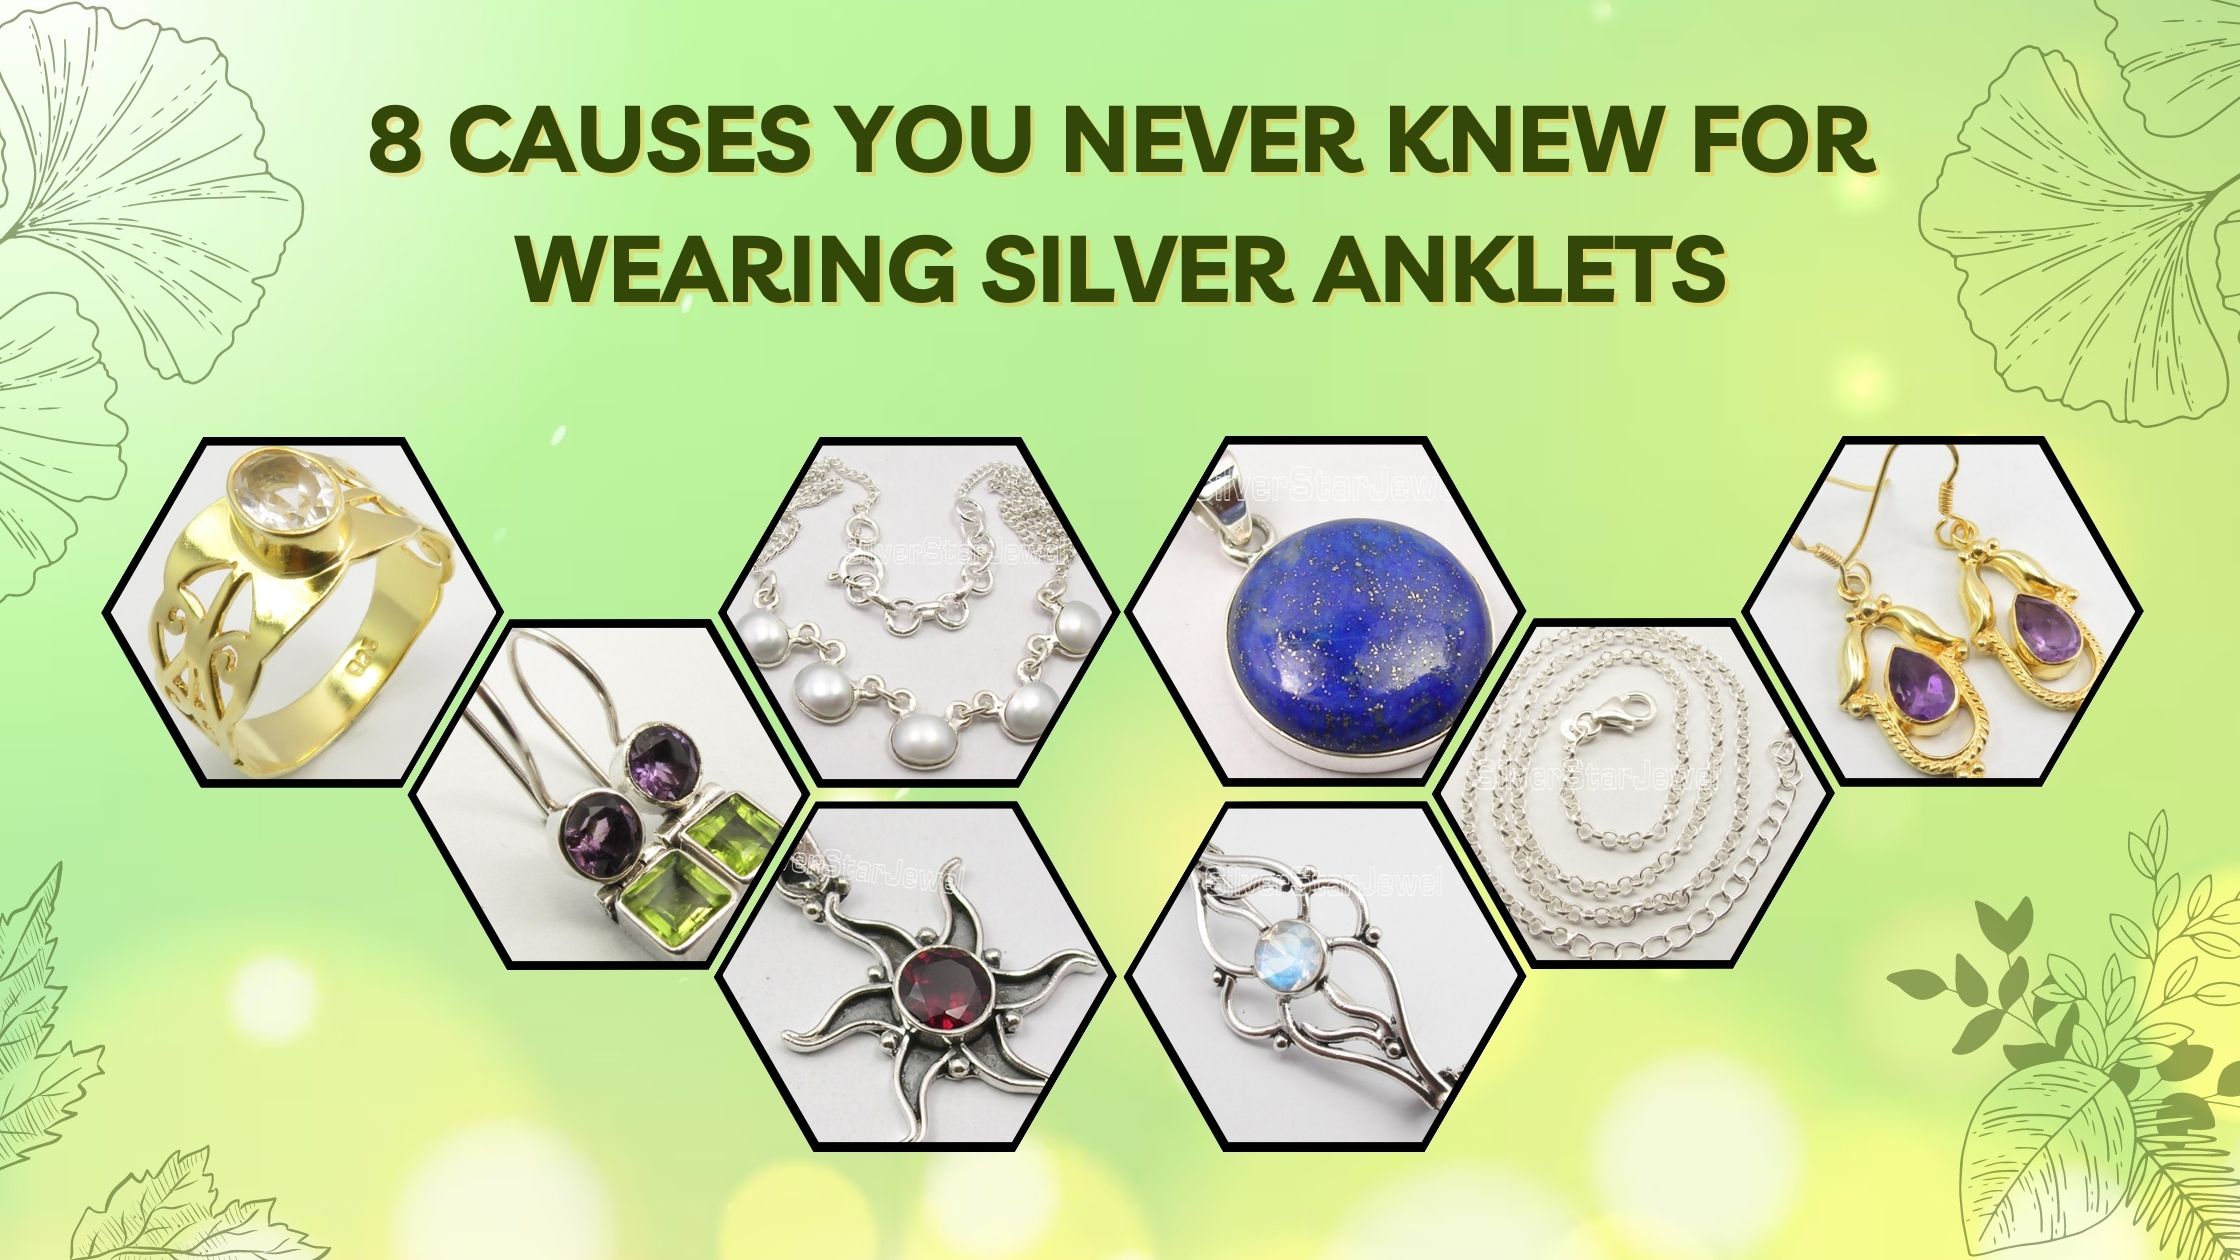 8 Causes You Never Knew for Wearing Silver Anklets